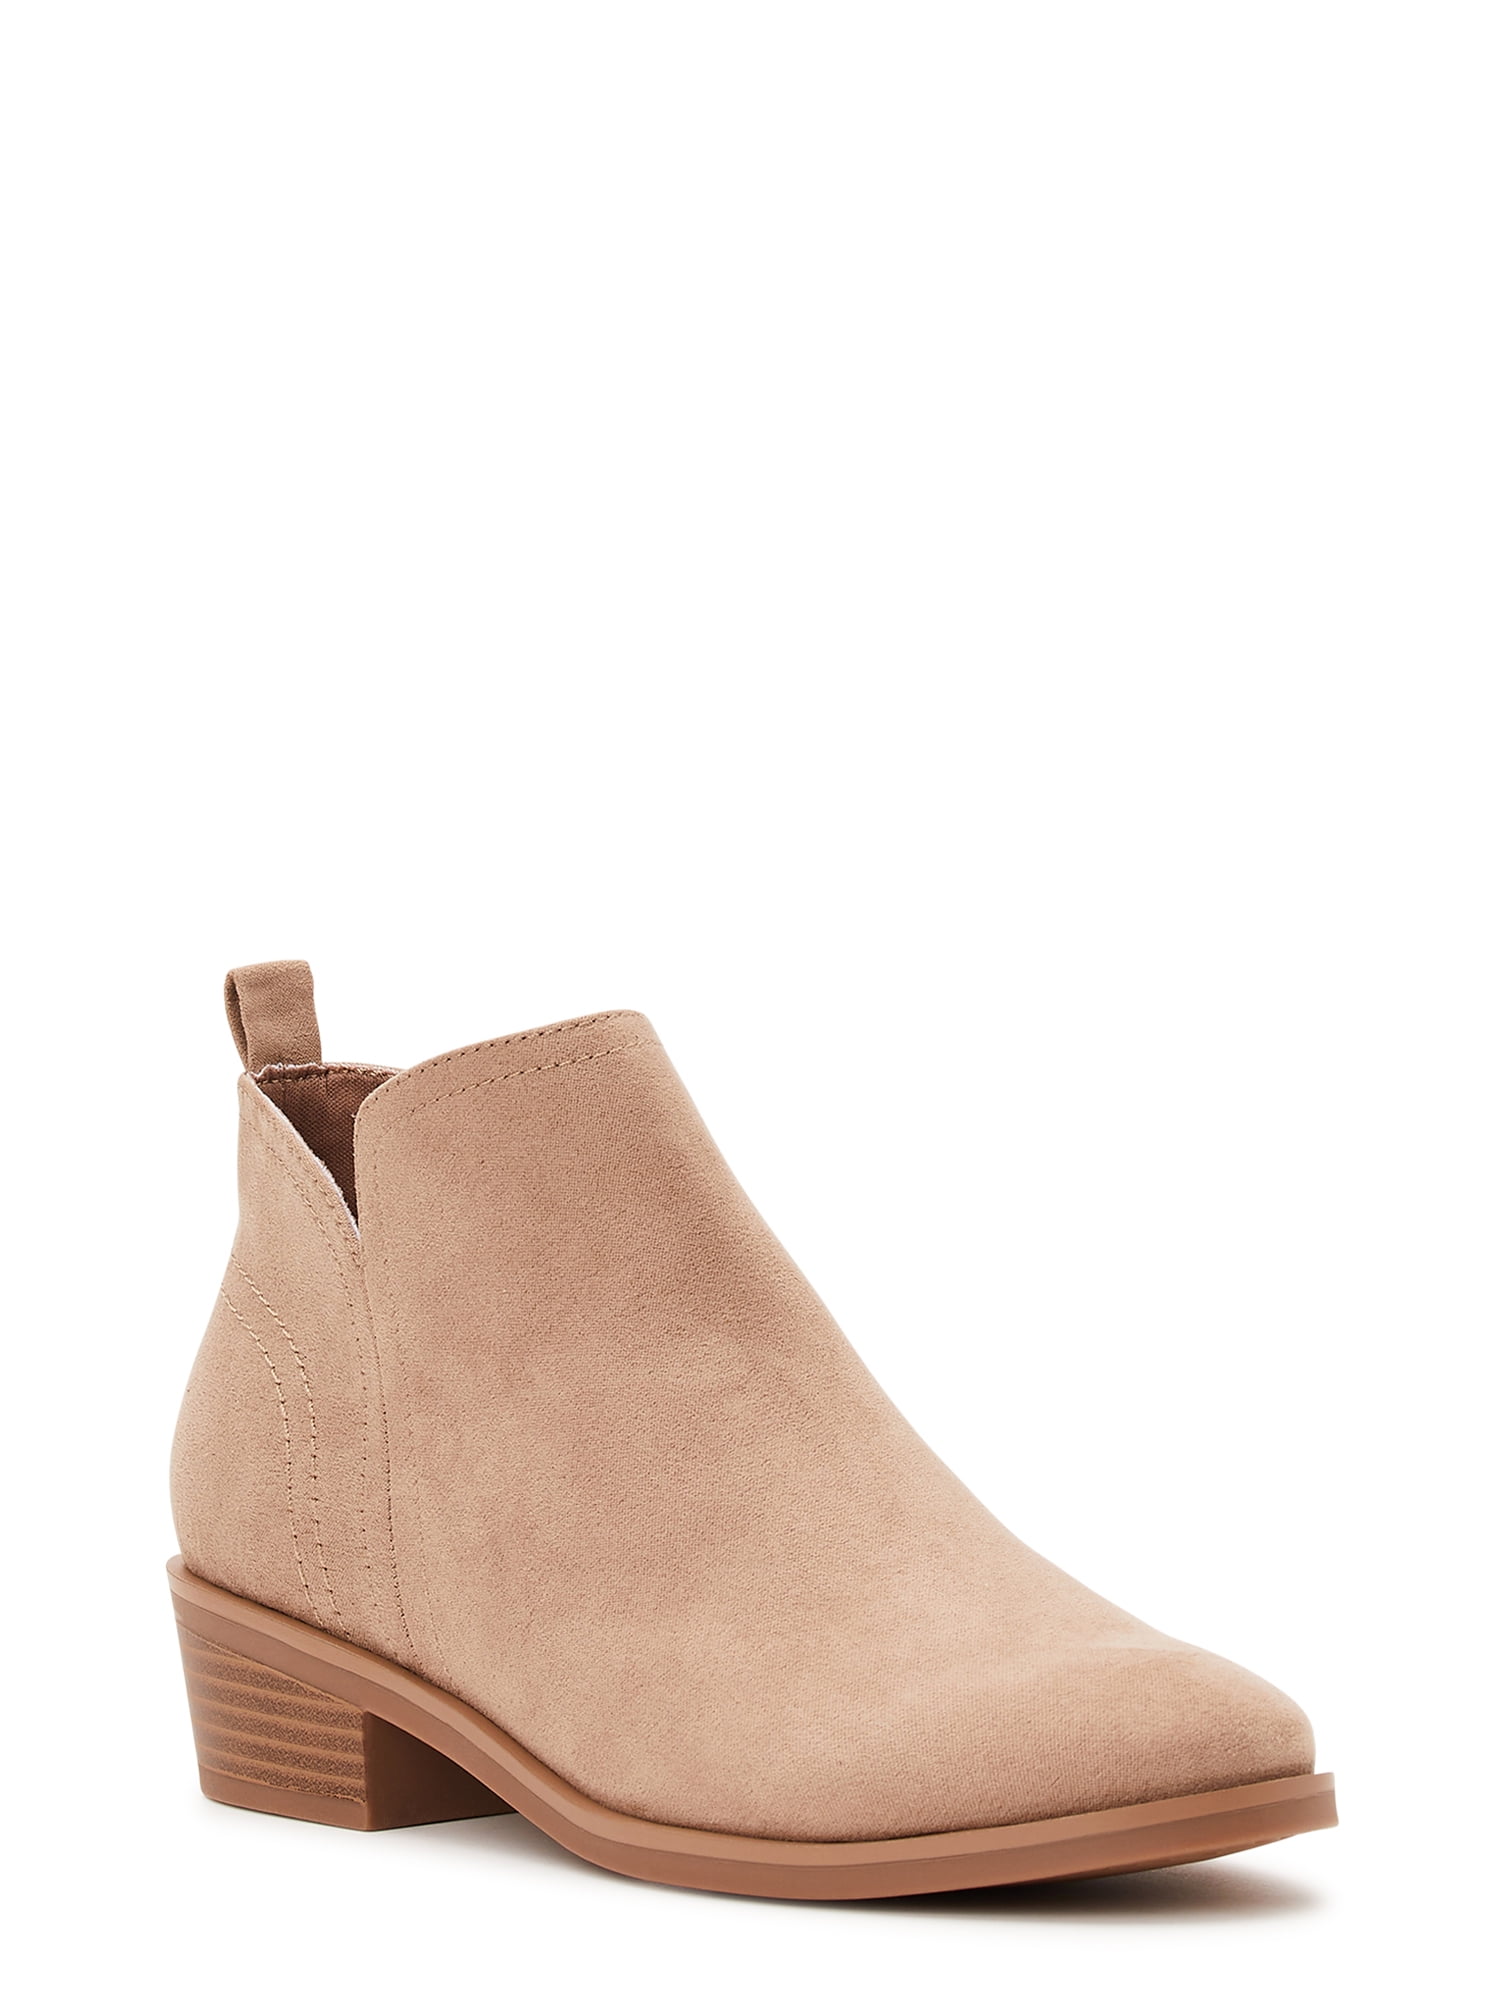 Time and Tru Women's Faux Suede Ankle Boots, Wide Width Available